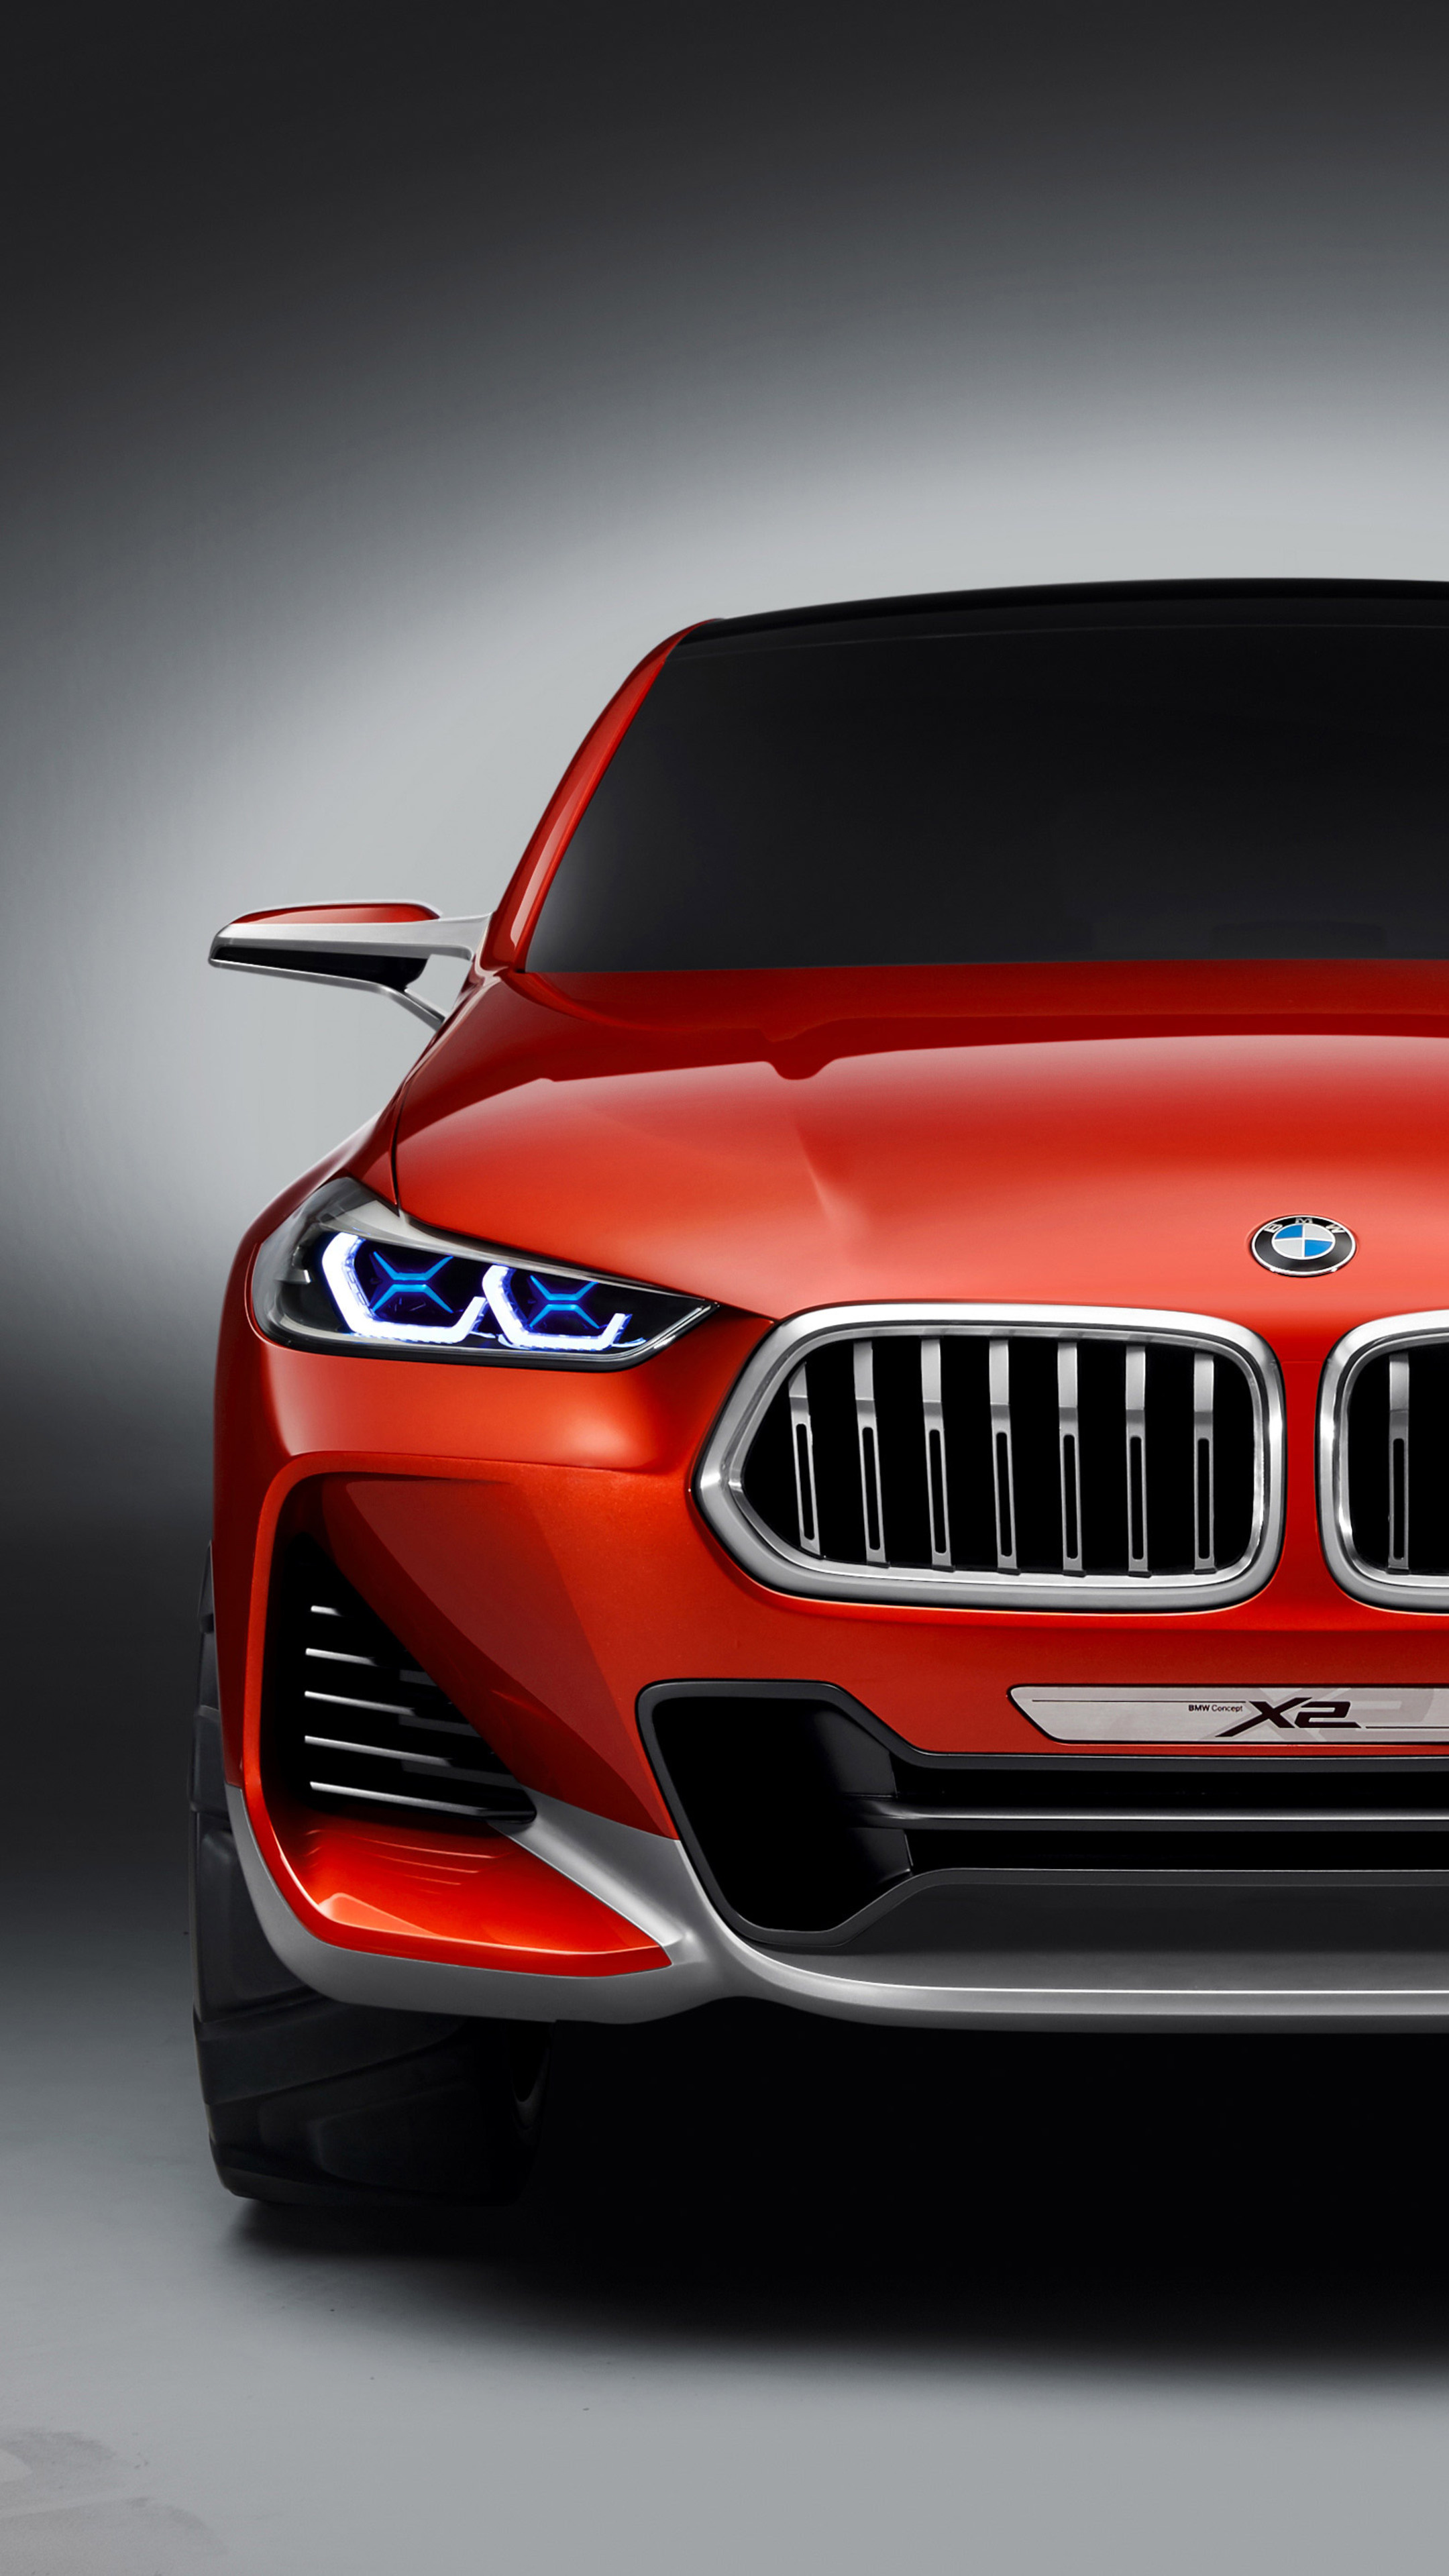 BMW X2, Concept car, Sony Xperia, HD 4K wallpapers, 2160x3840 4K Phone